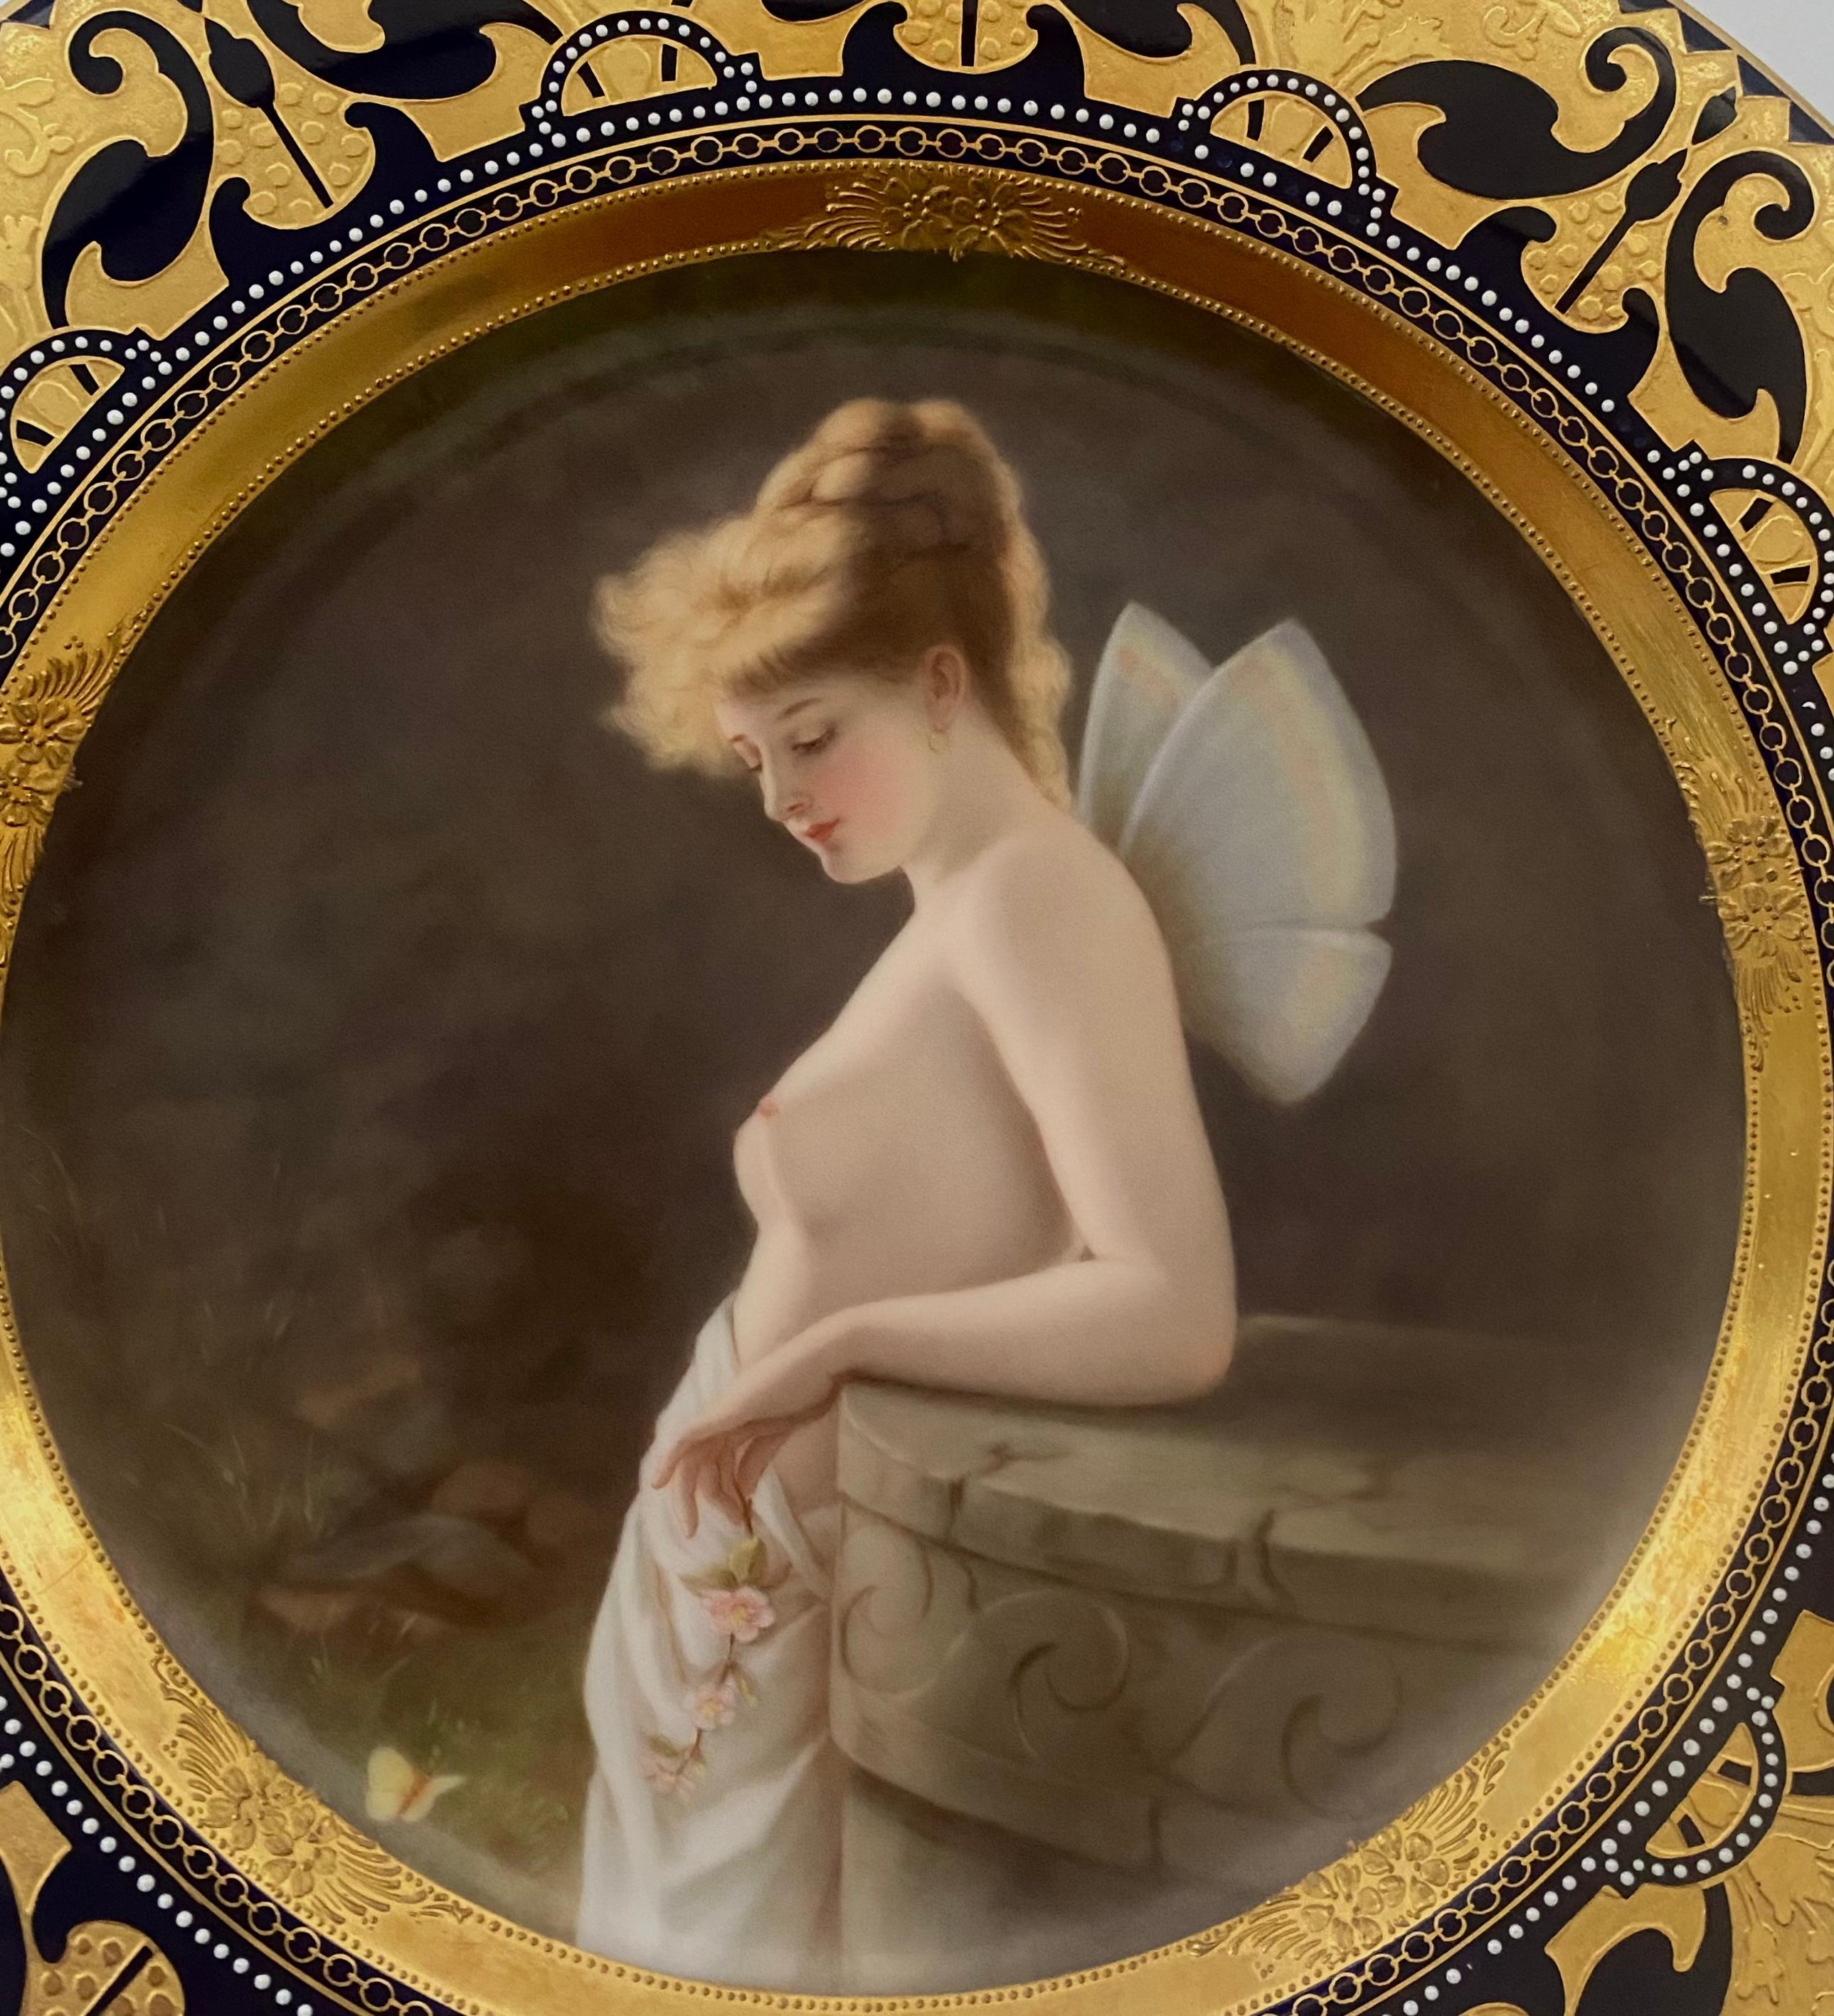 Vienna style porcelain plate, by Hutschenreuter, c. 1900. Beautifully hand painted and signed by F. Becher, with a titled portrait ‘Psyche Rege’. The bare breasted Nymph, leaning against a pillar, observing a butterfly, whilst holding a sprig of